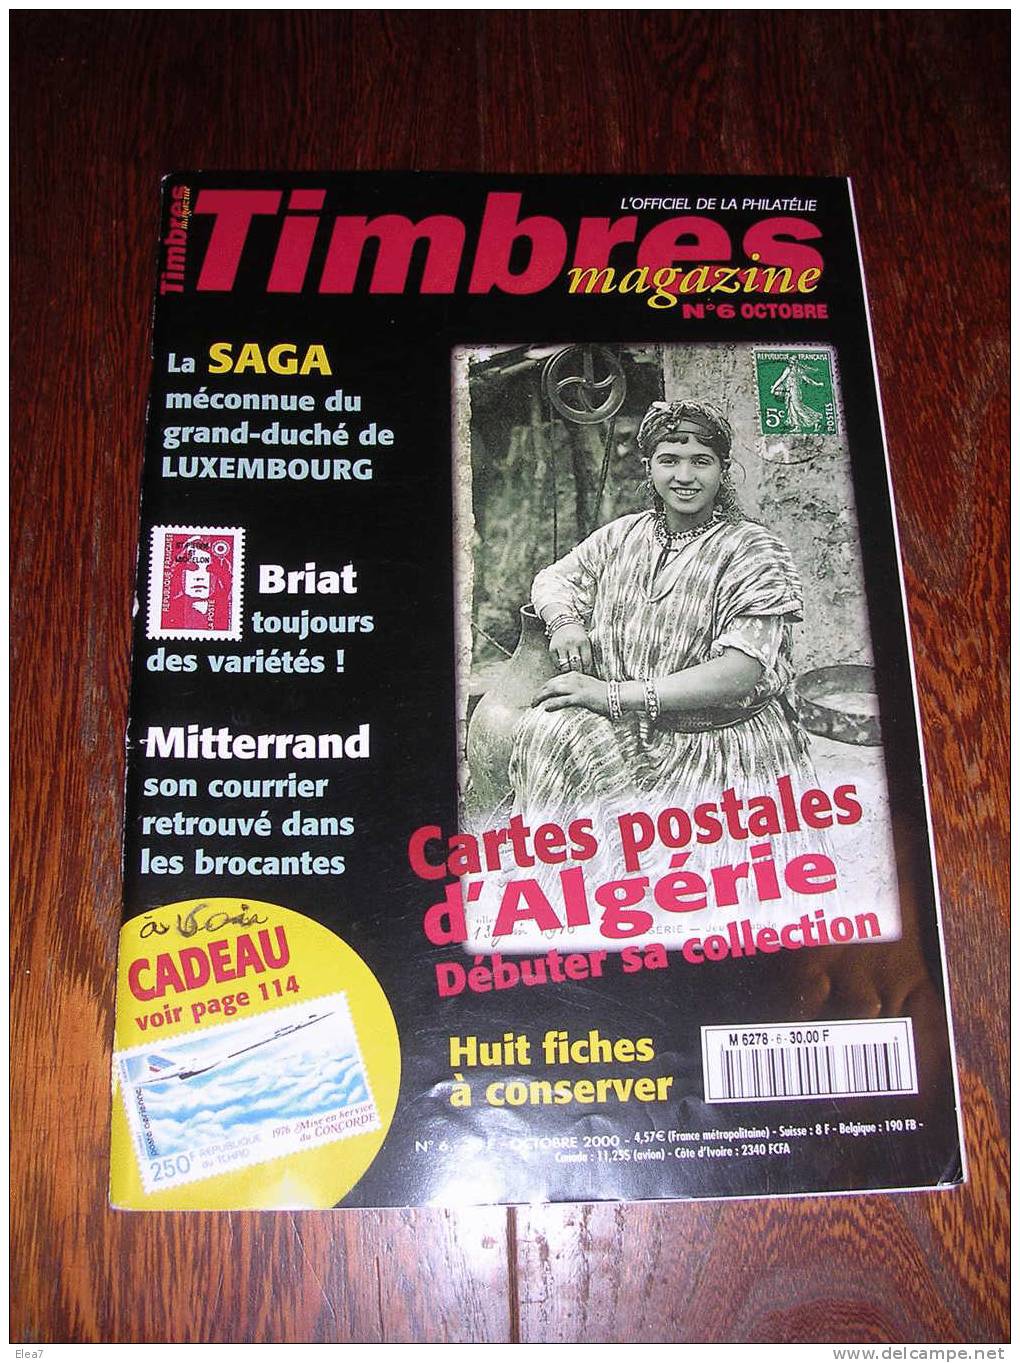 TIMBRES MAGAZINE - N°6 Octobre 2000 - French (from 1941)